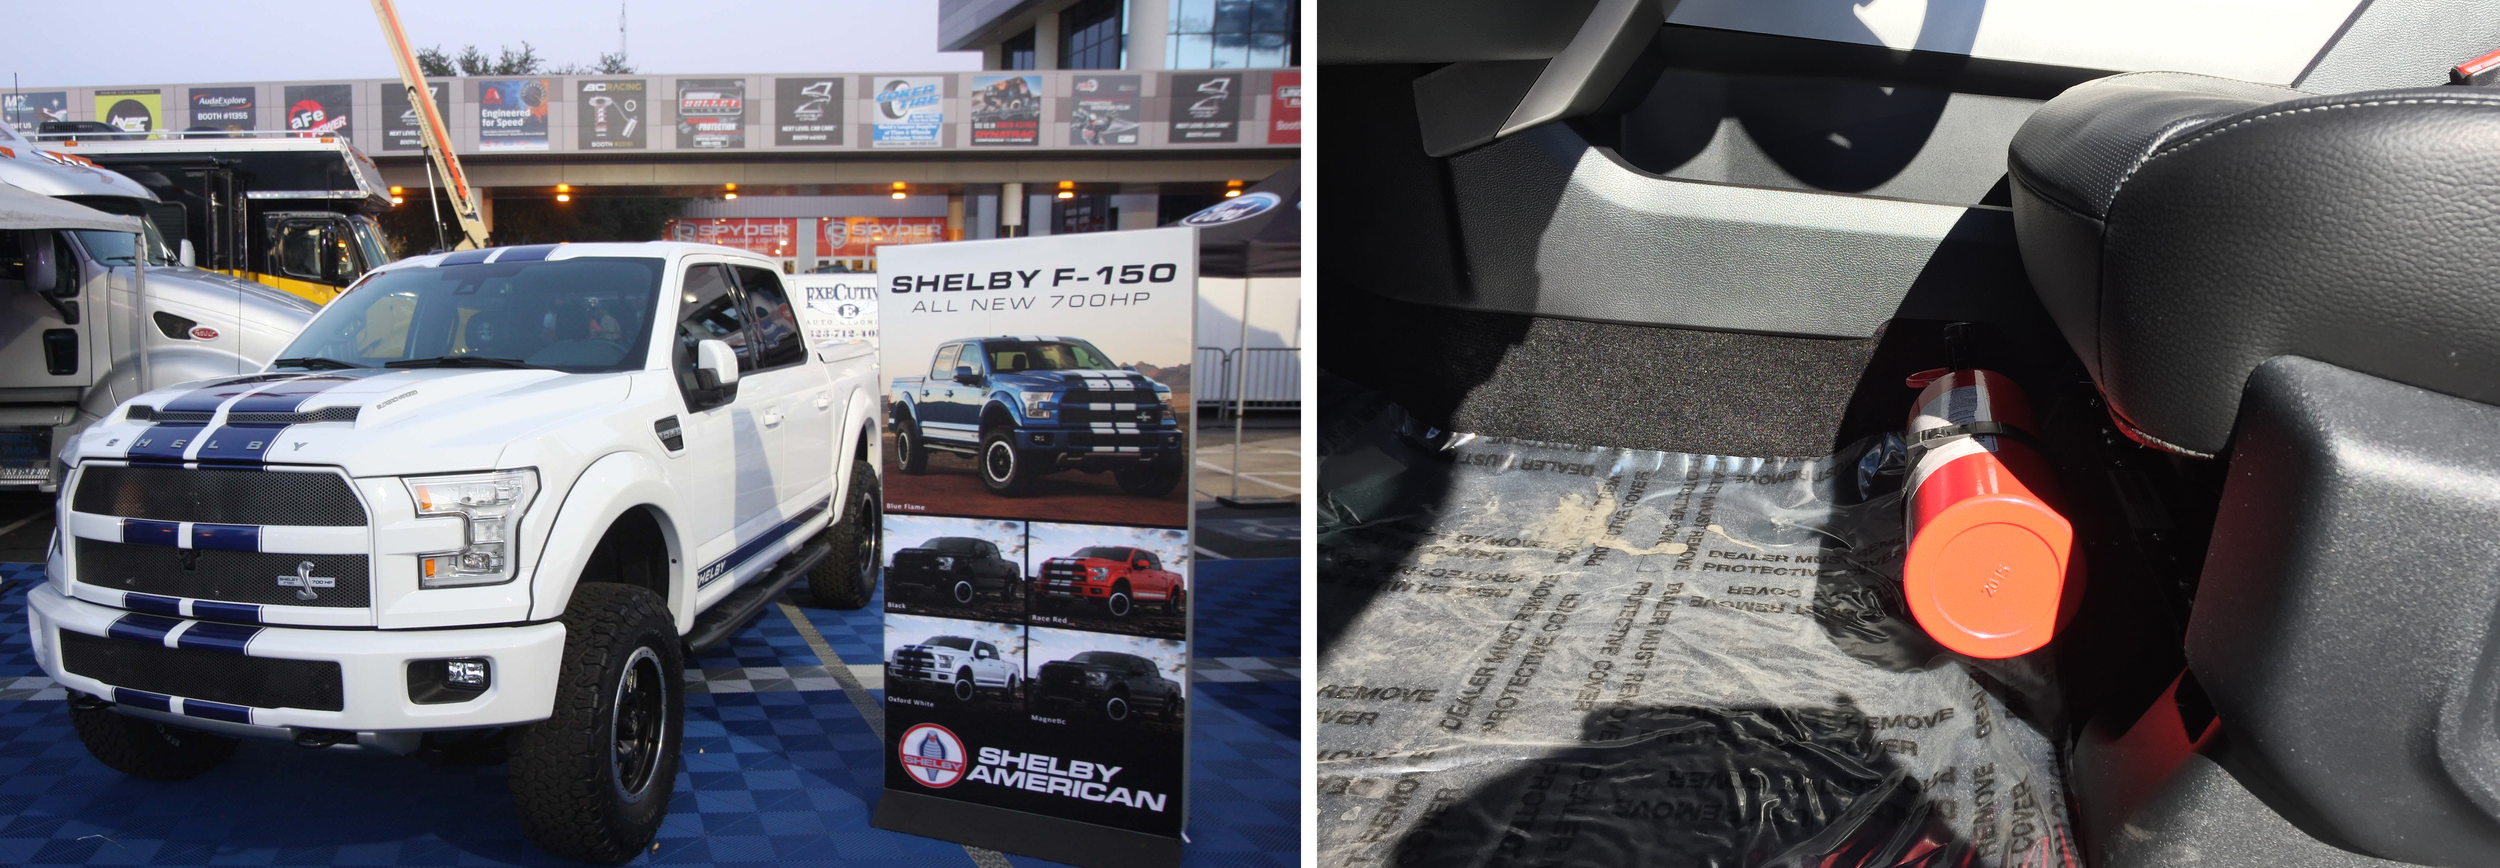 2016 Ford F150 on Shelby booth at SEMA